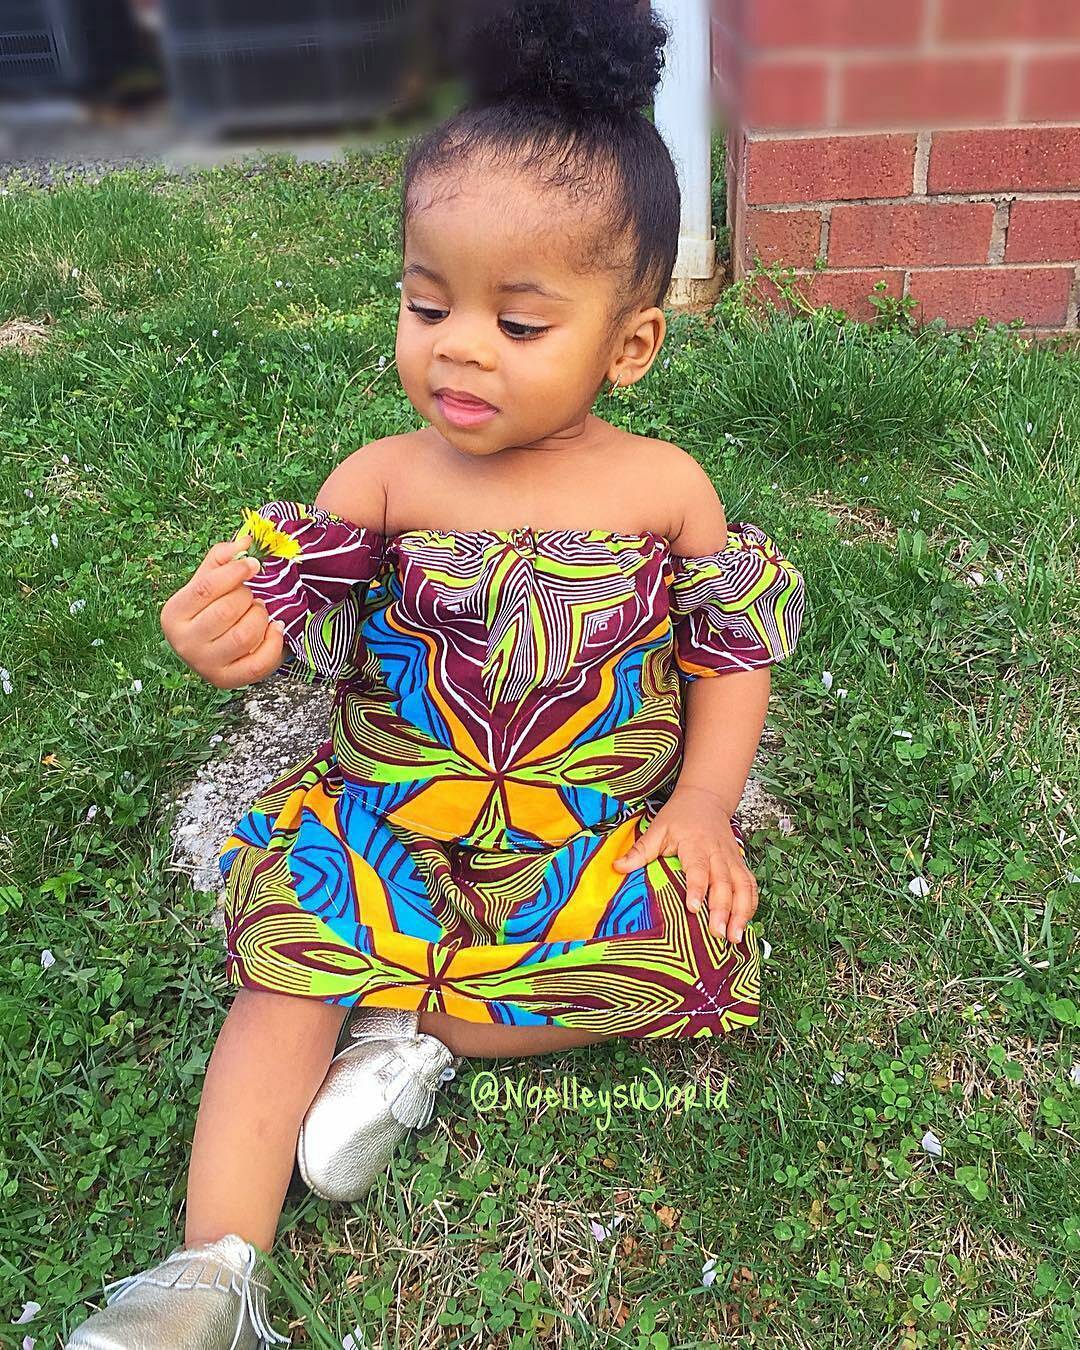 native styles for baby girl